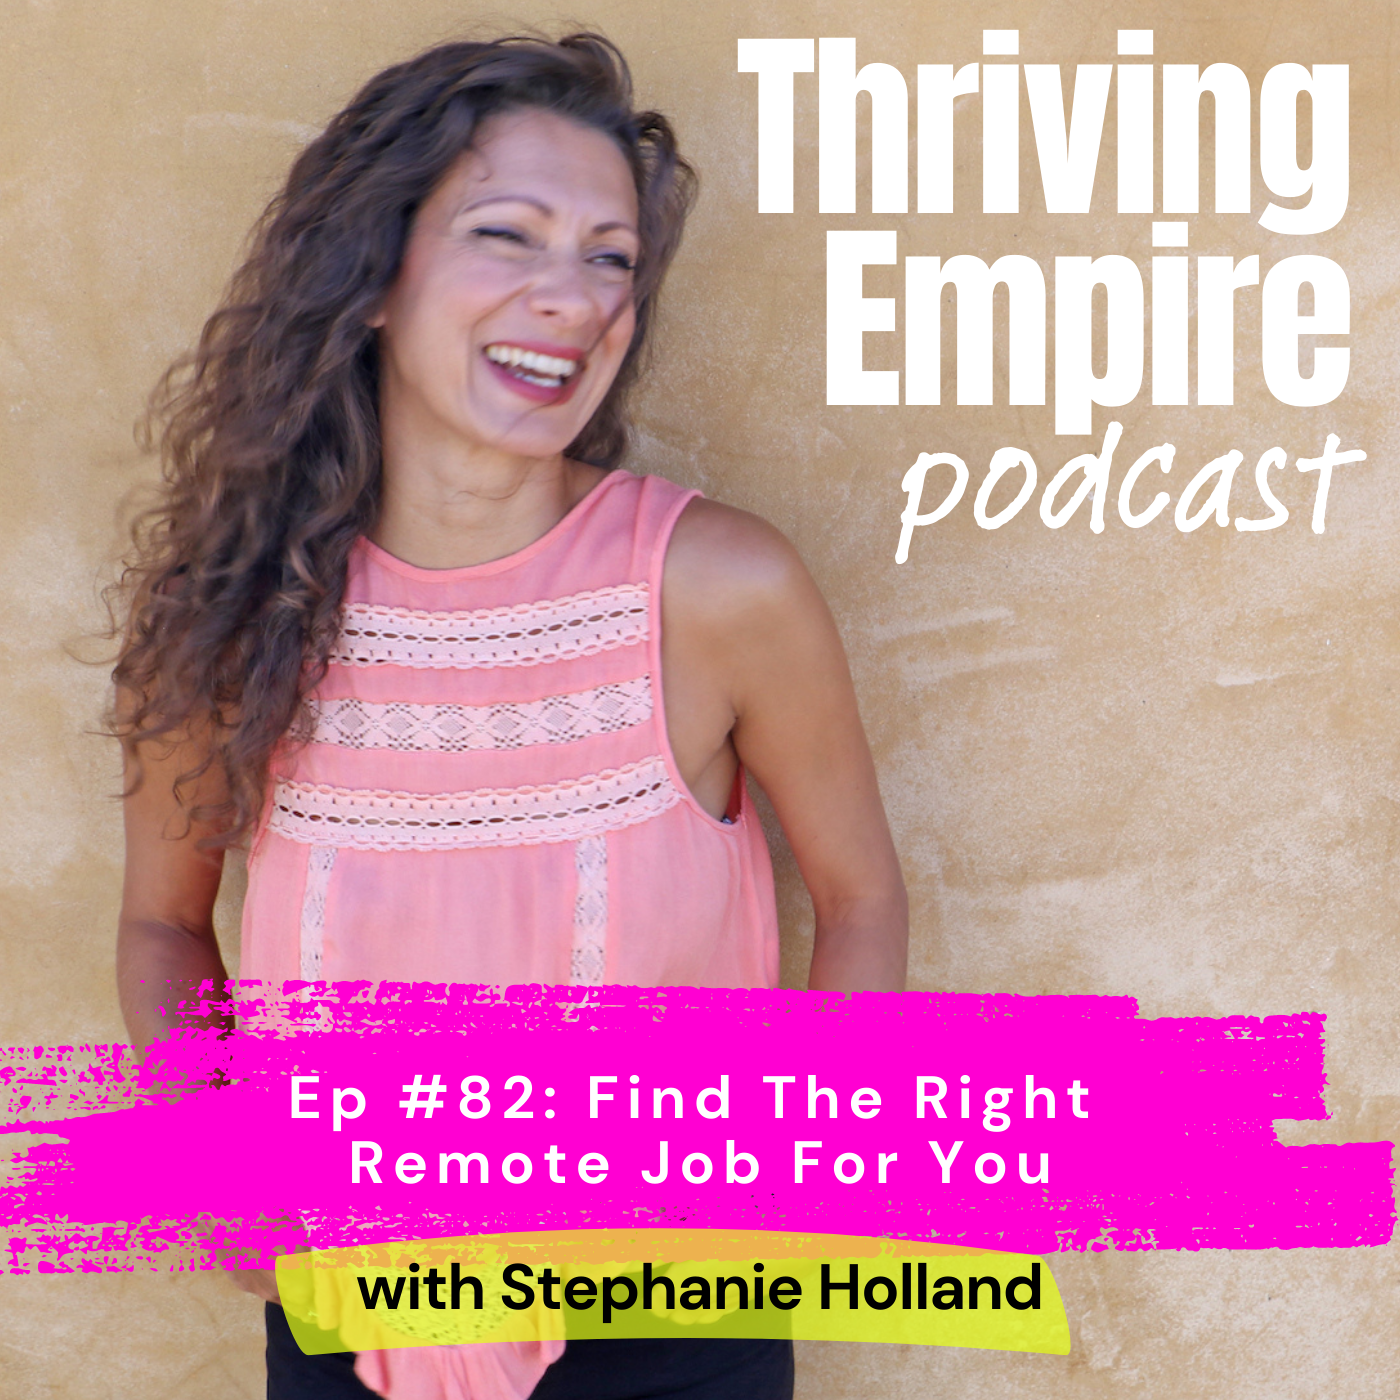 Ep #82: Find The Right Remote Job For You